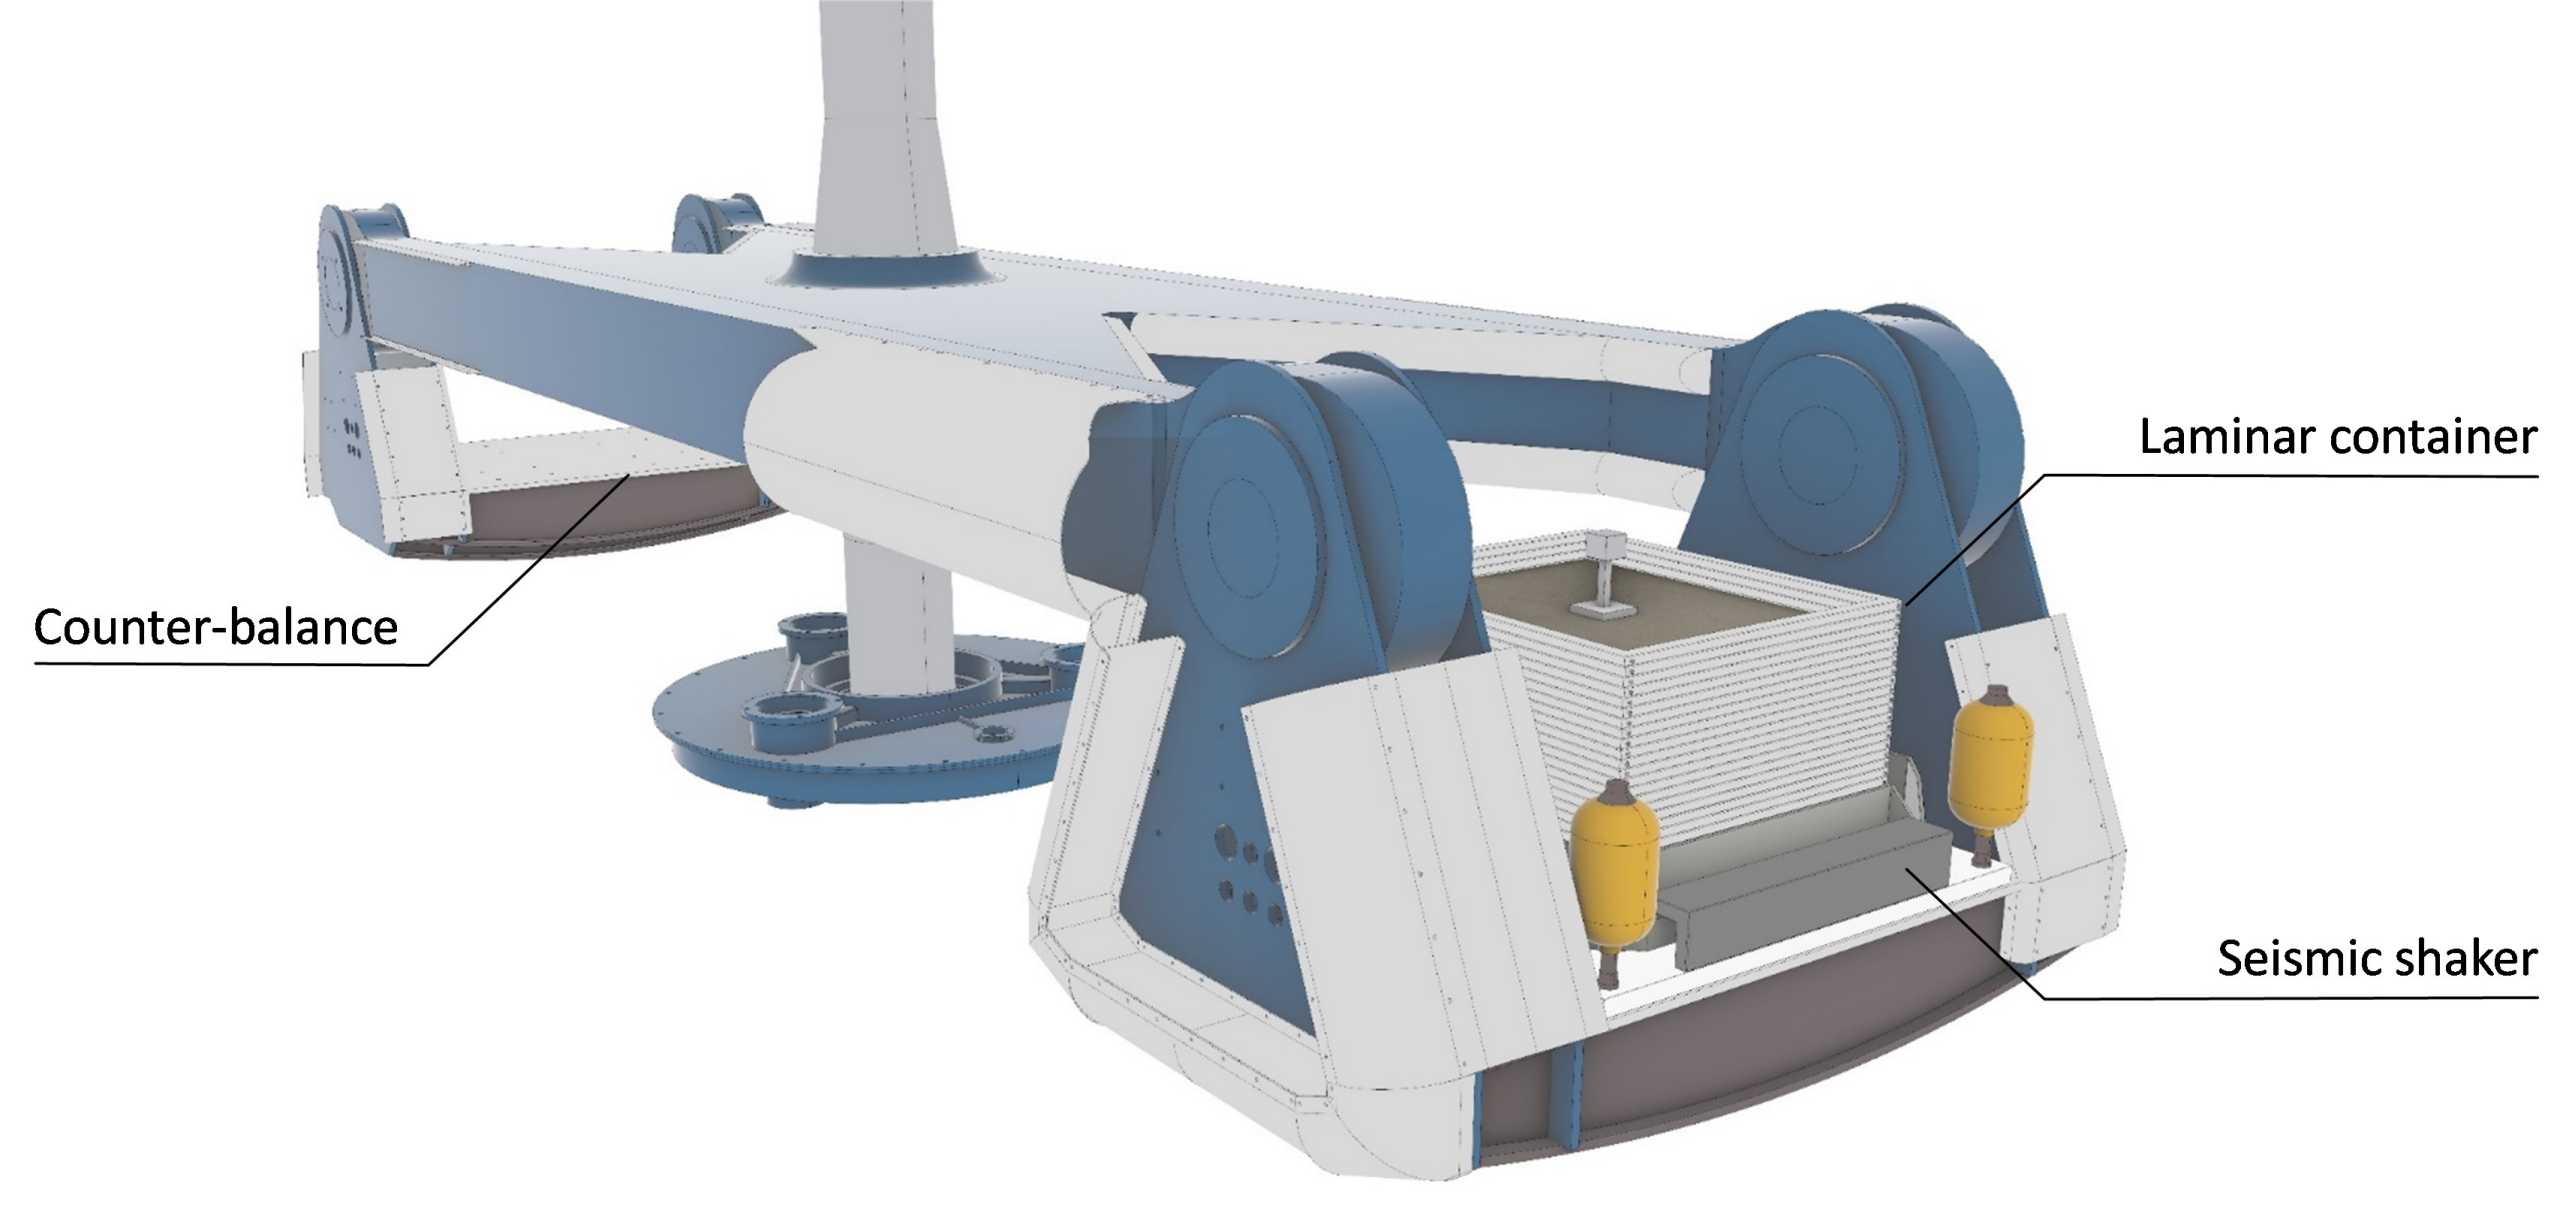 Rendering of the refurbished beam centrifuge, with the on-board seismic shaker and the laminar container.